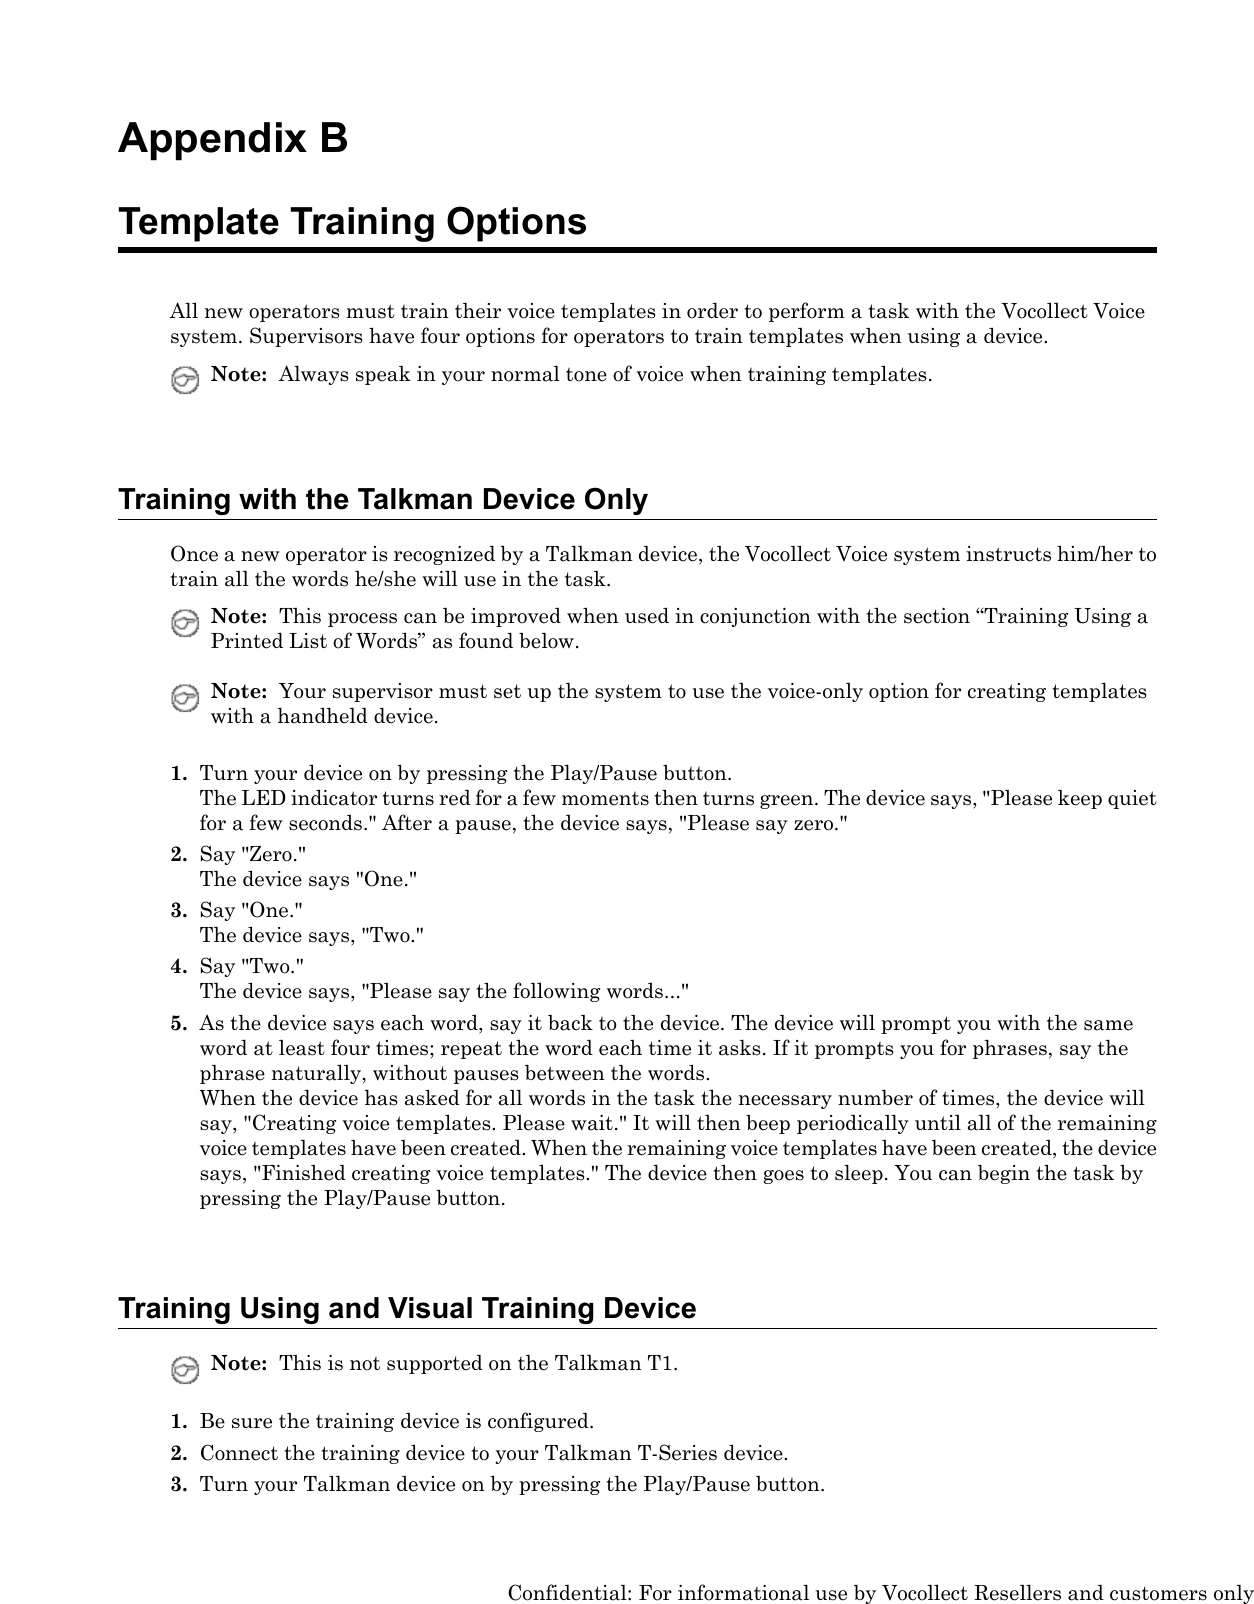 Appendix BTemplate Training OptionsAll new operators must train their voice templates in order to perform a task with the Vocollect Voicesystem. Supervisors have four options for operators to train templates when using a device.Note: Always speak in your normal tone of voice when training templates.Training with the Talkman Device OnlyOnce a new operator is recognized by a Talkman device, the Vocollect Voice system instructs him/her totrain all the words he/she will use in the task.Note: This process can be improved when used in conjunction with the section “Training Using aPrinted List of Words” as found below.Note: Your supervisor must set up the system to use the voice-only option for creating templateswith a handheld device.1. Turn your device on by pressing the Play/Pause button.The LED indicator turns red for a few moments then turns green. The device says, &quot;Please keep quietfor a few seconds.&quot; After a pause, the device says, &quot;Please say zero.&quot;2. Say &quot;Zero.&quot;The device says &quot;One.&quot;3. Say &quot;One.&quot;The device says, &quot;Two.&quot;4. Say &quot;Two.&quot;The device says, &quot;Please say the following words...&quot;5. As the device says each word, say it back to the device. The device will prompt you with the sameword at least four times; repeat the word each time it asks. If it prompts you for phrases, say thephrase naturally, without pauses between the words.When the device has asked for all words in the task the necessary number of times, the device willsay, &quot;Creating voice templates. Please wait.&quot; It will then beep periodically until all of the remainingvoice templates have been created. When the remaining voice templates have been created, the devicesays, &quot;Finished creating voice templates.&quot; The device then goes to sleep. You can begin the task bypressing the Play/Pause button.Training Using and Visual Training DeviceNote: This is not supported on the Talkman T1.1. Be sure the training device is configured.2. Connect the training device to your Talkman T-Series device.3. Turn your Talkman device on by pressing the Play/Pause button.Confidential: For informational use by Vocollect Resellers and customers only